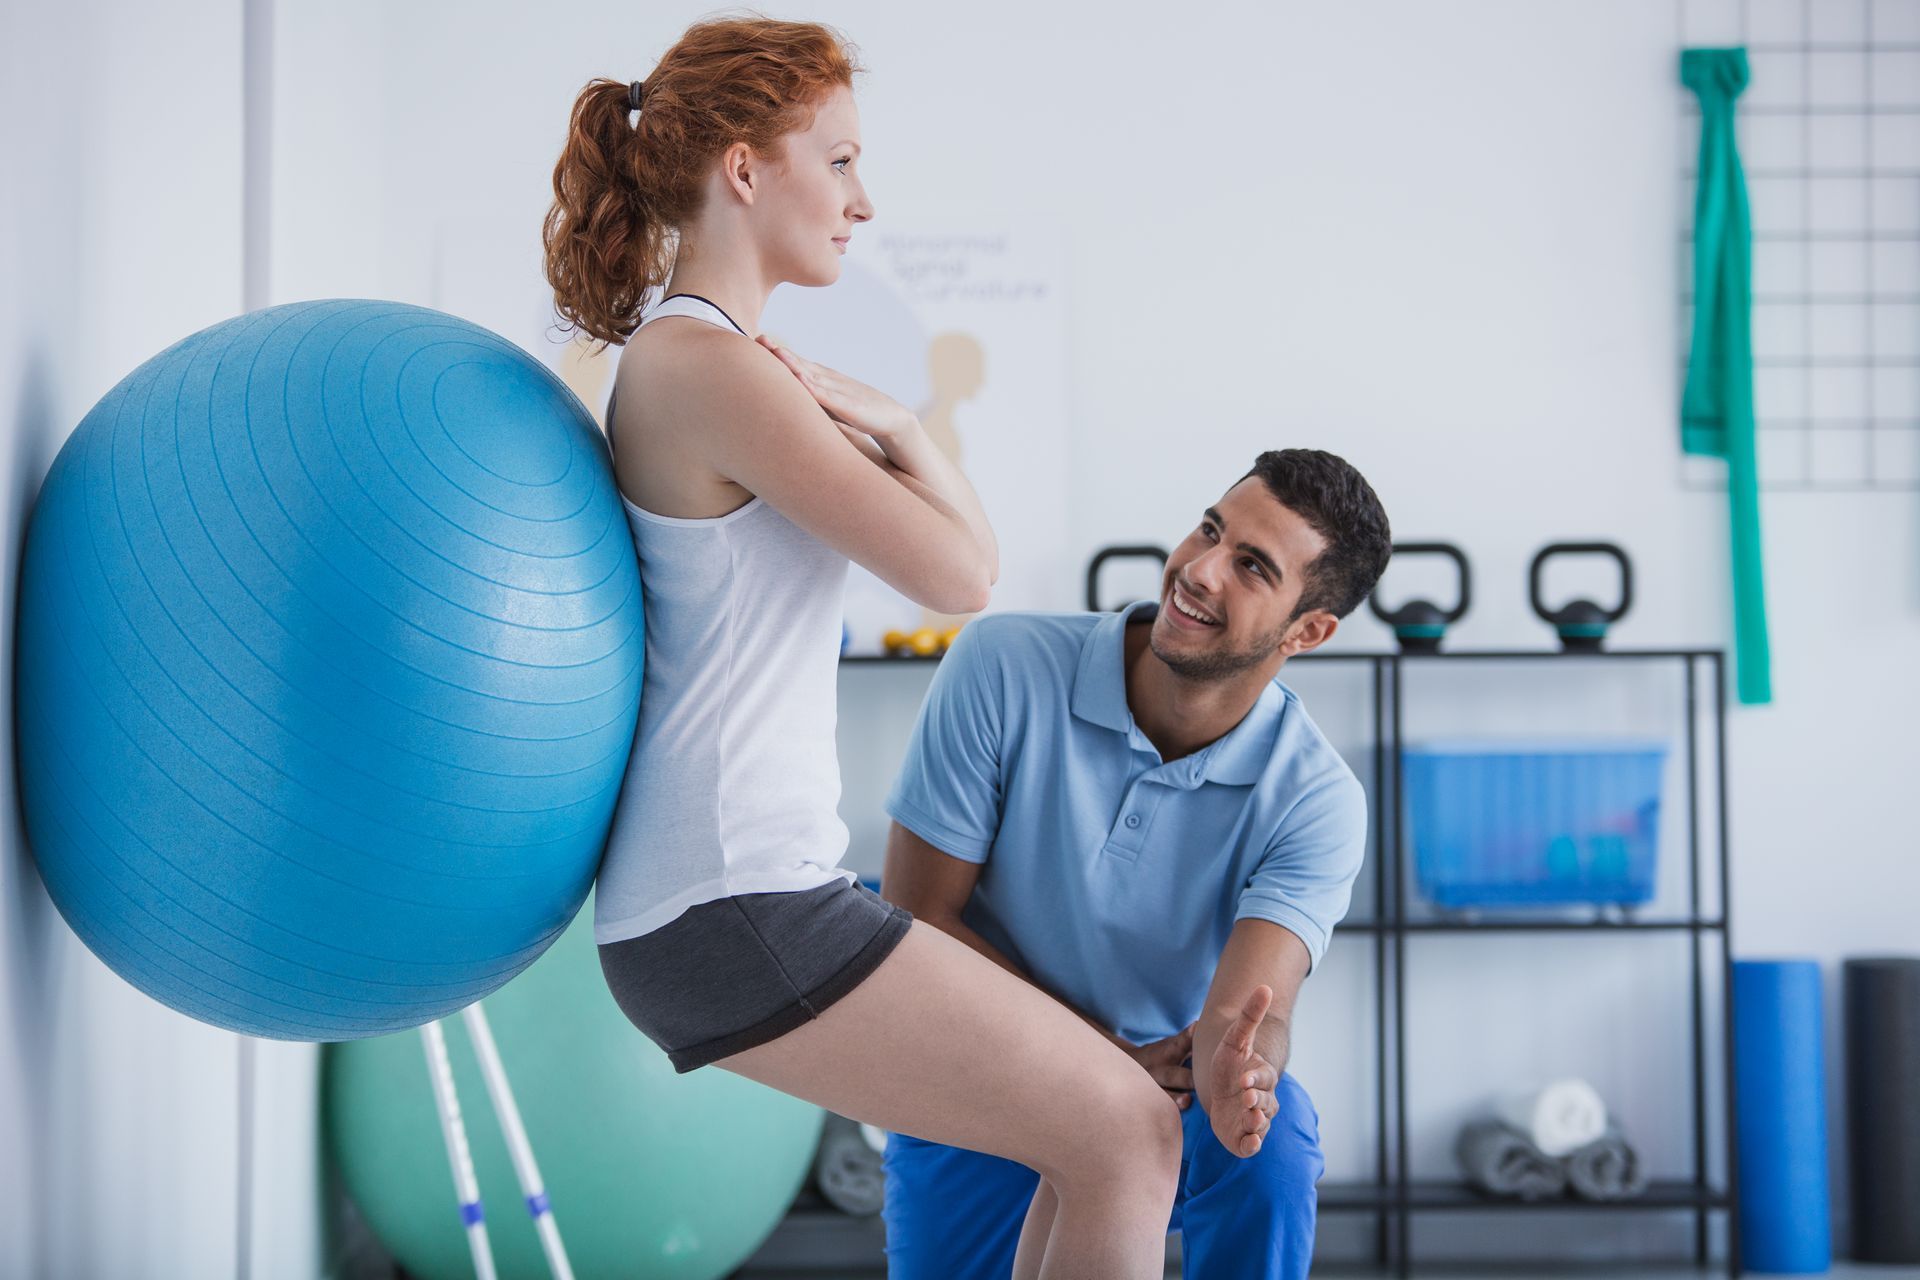 A man is helping a woman with a pilates ball in a gym.